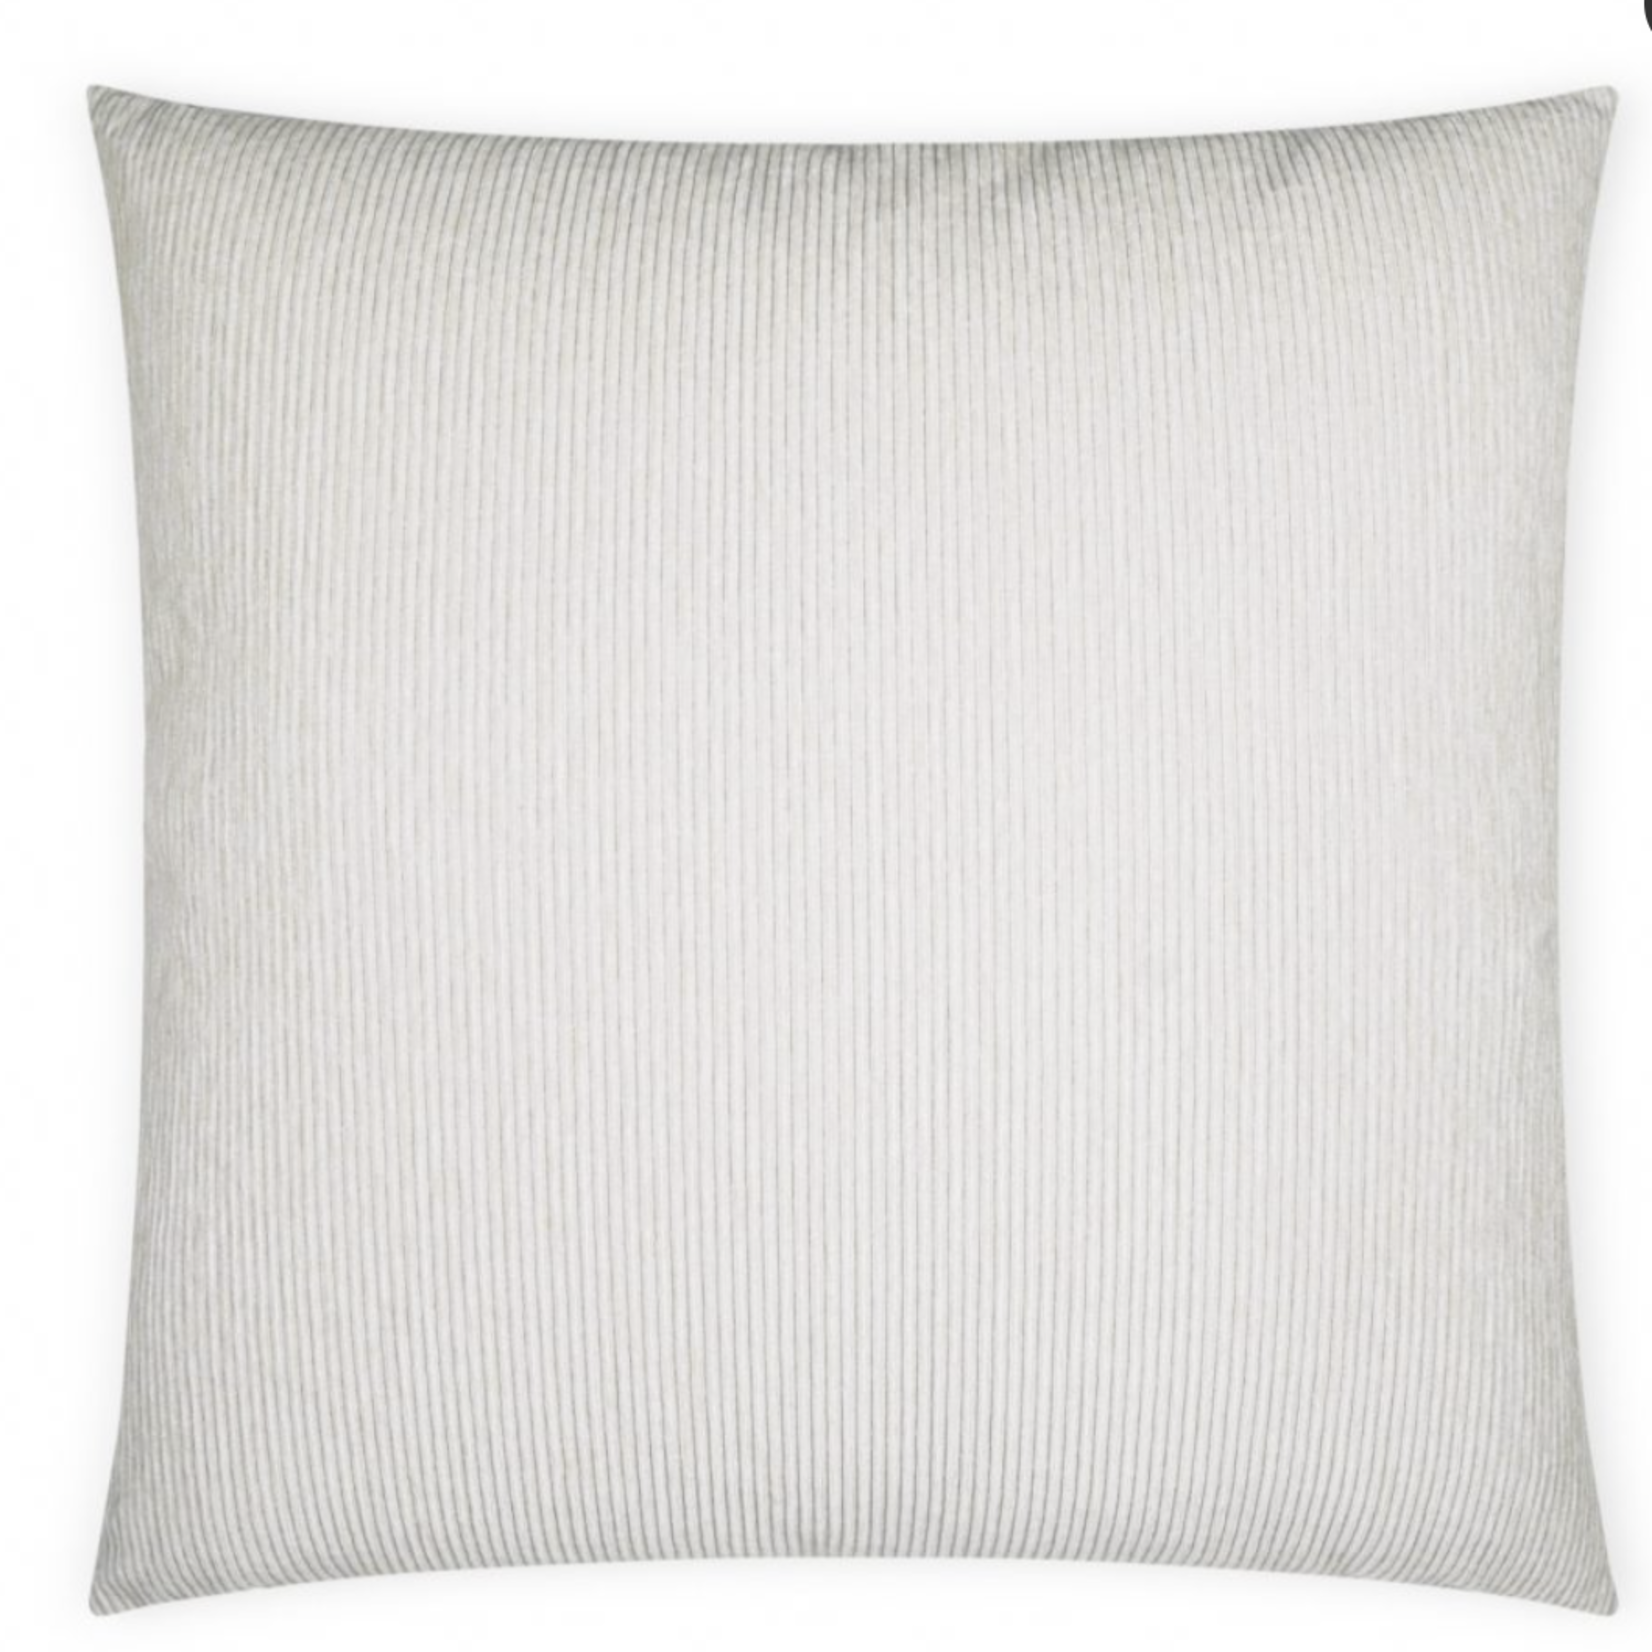 Outside The Box 24x24 Ridges Square Feather Down Pillow In Cadet